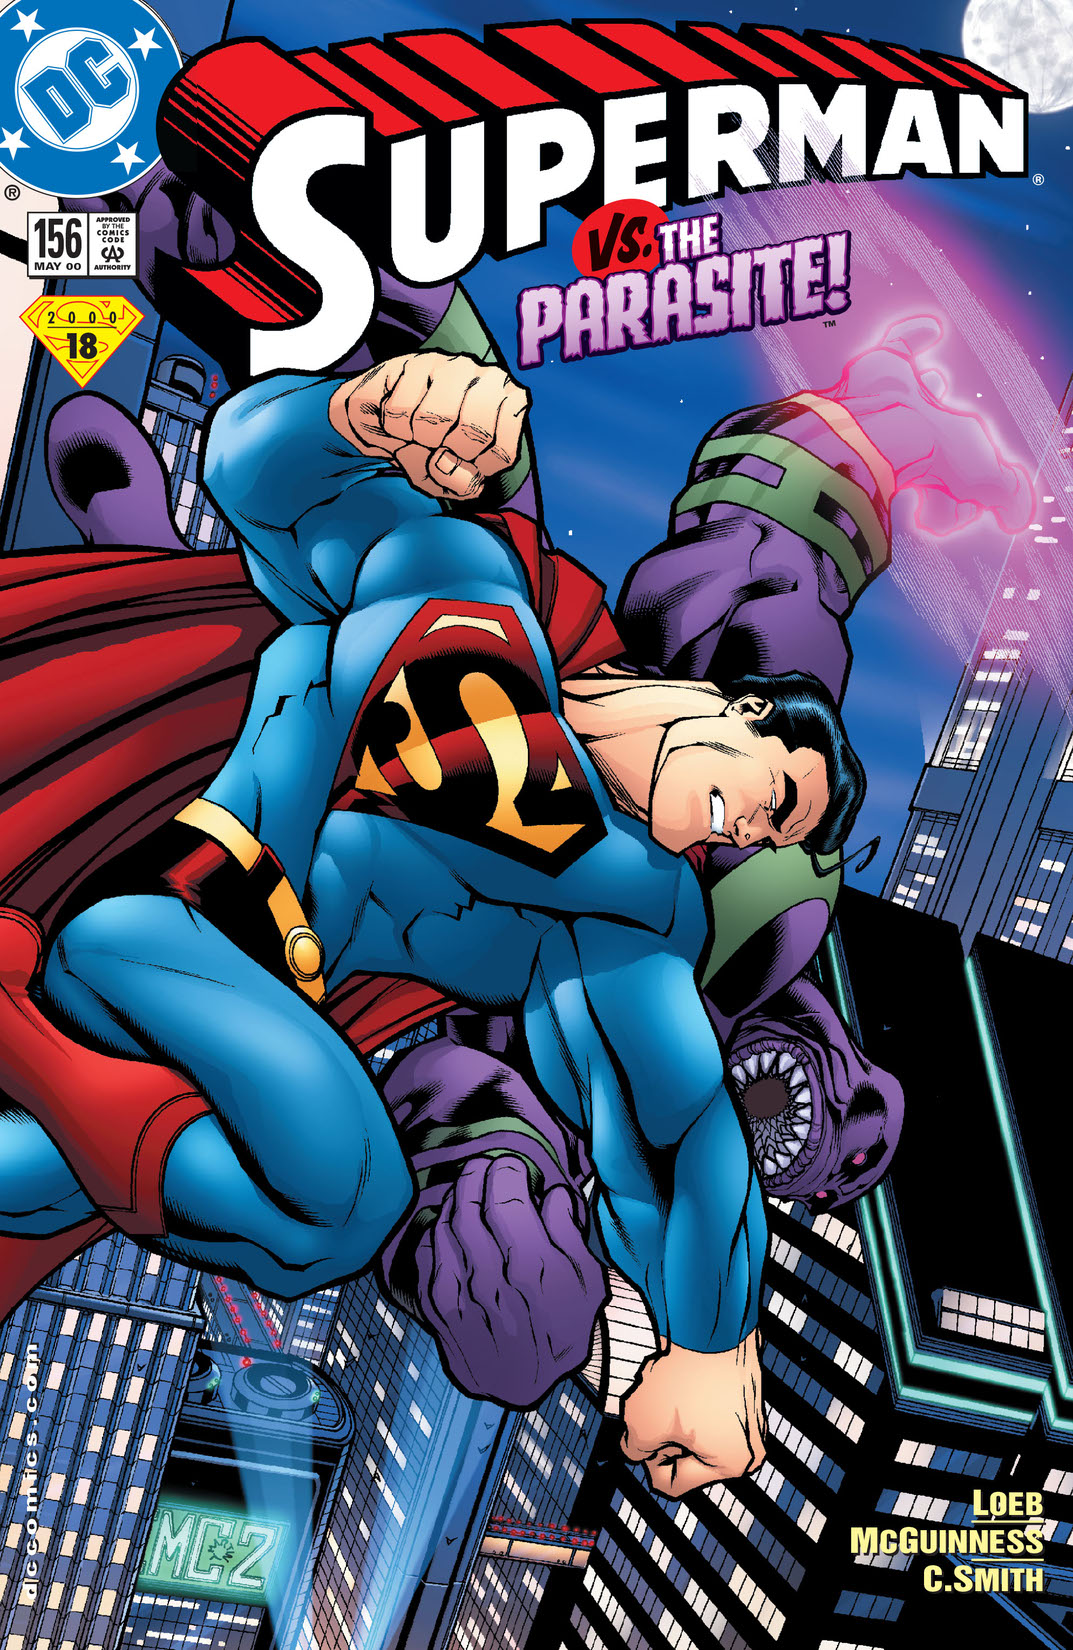 Superman (1986-2006) #156 preview images